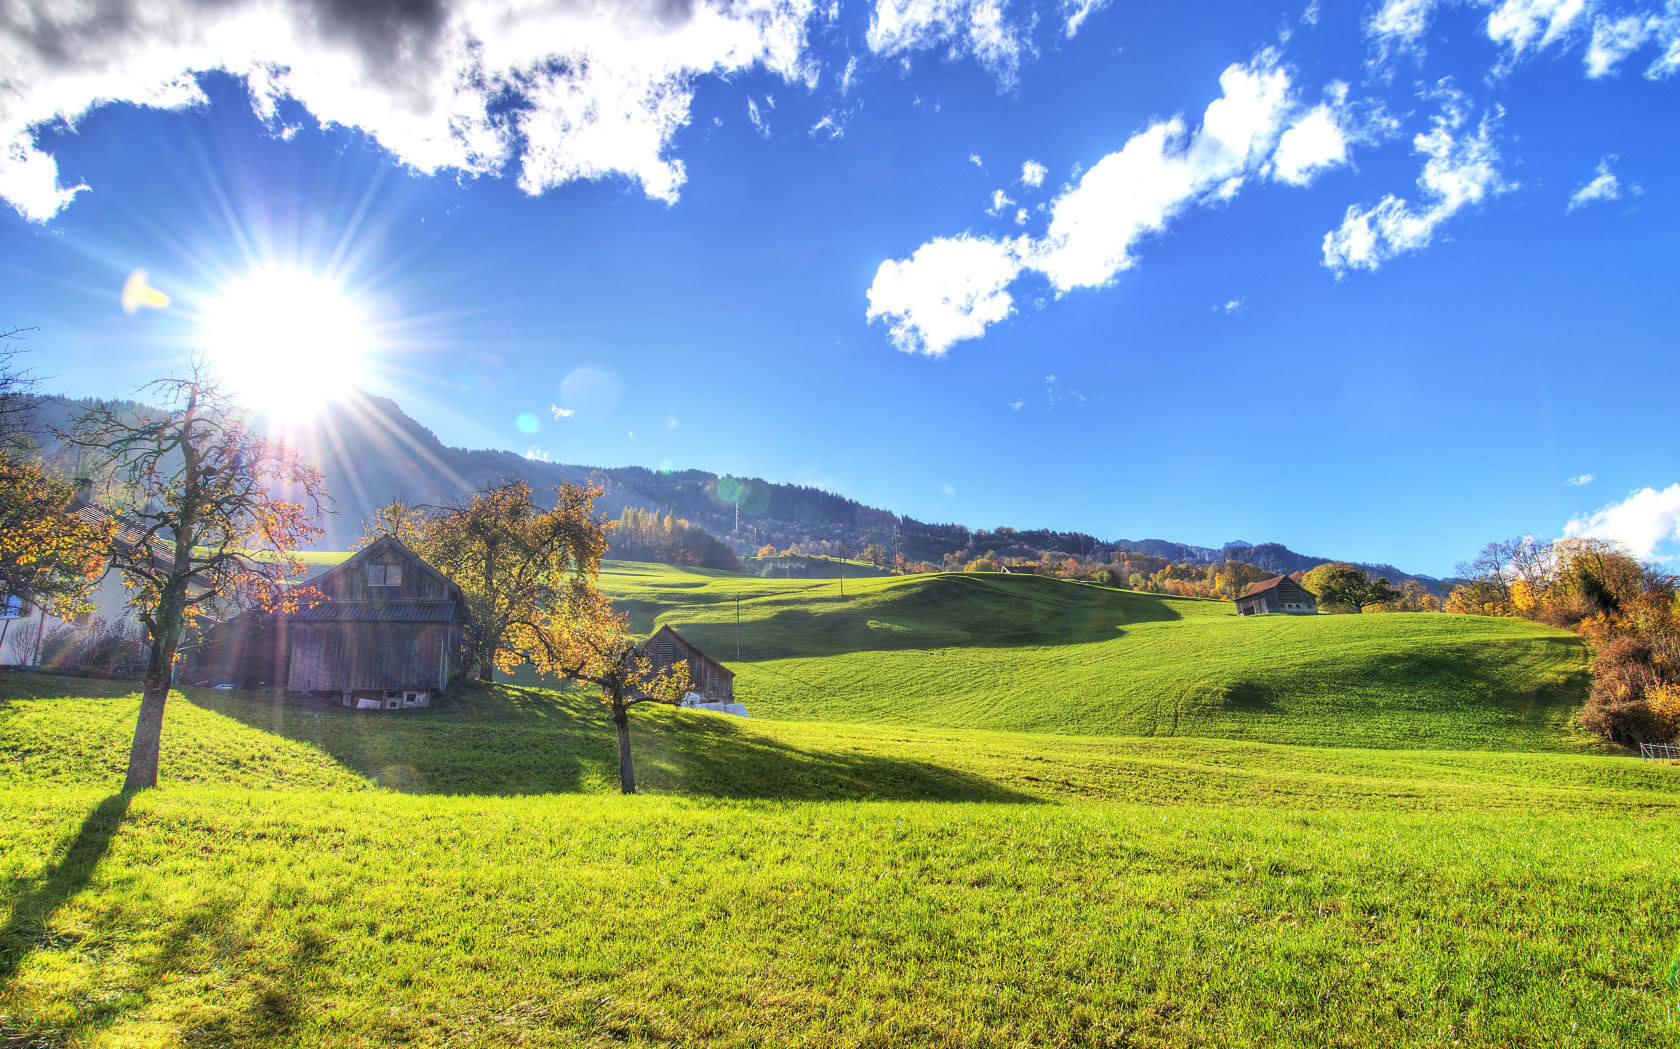 Sunny Autumn Day In The Country Widescreen Wallpaper Wide